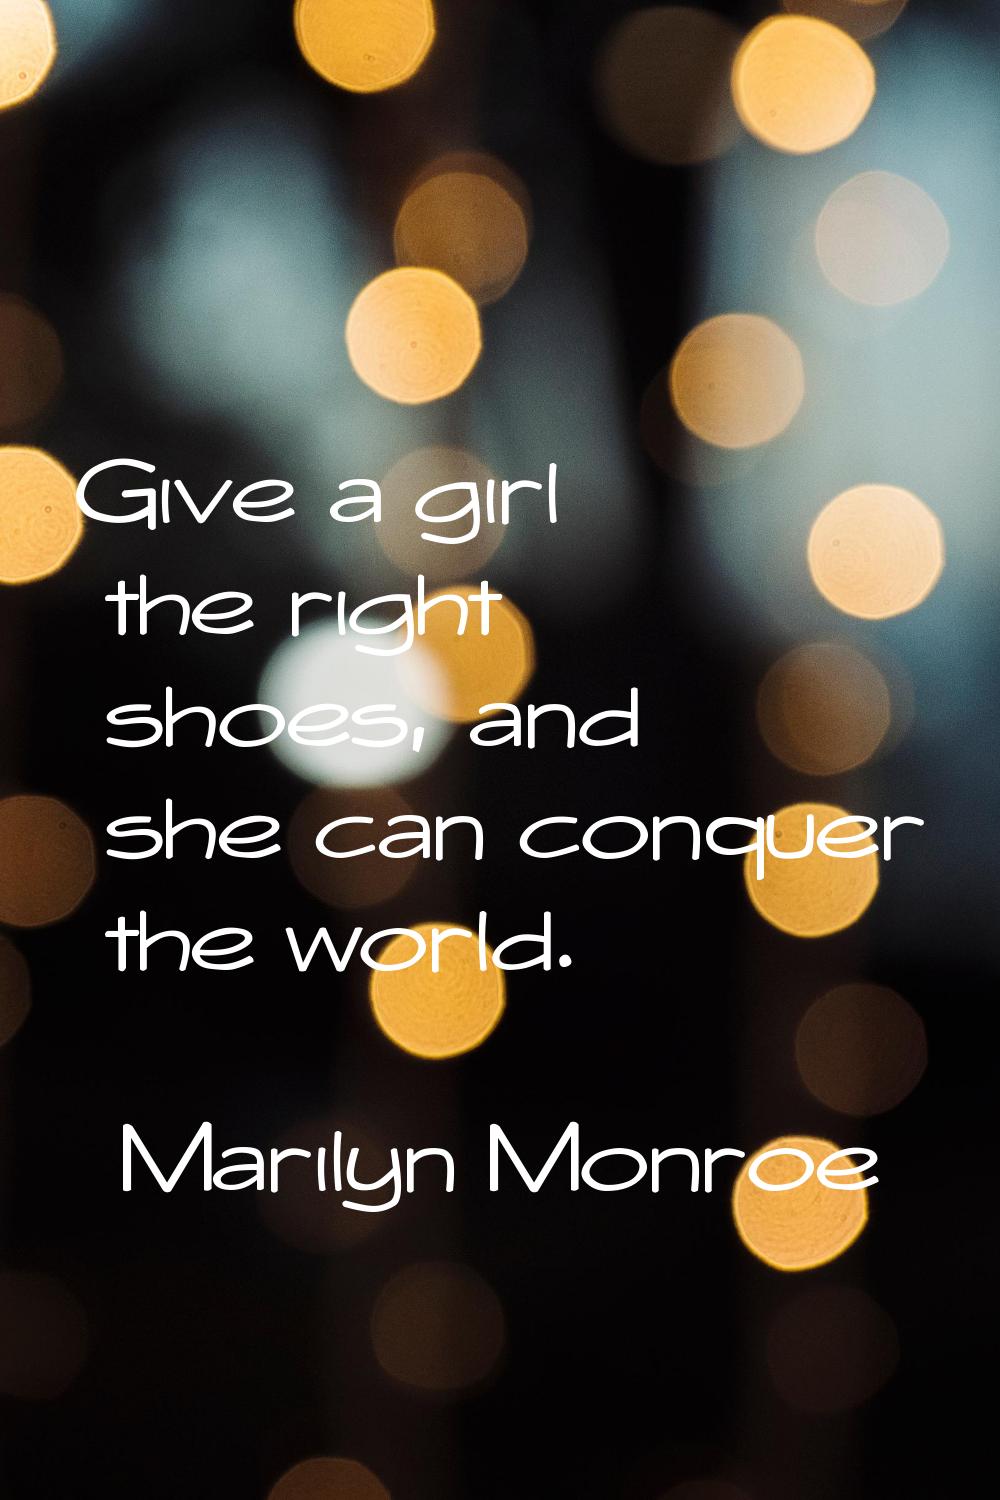 Give a girl the right shoes, and she can conquer the world.